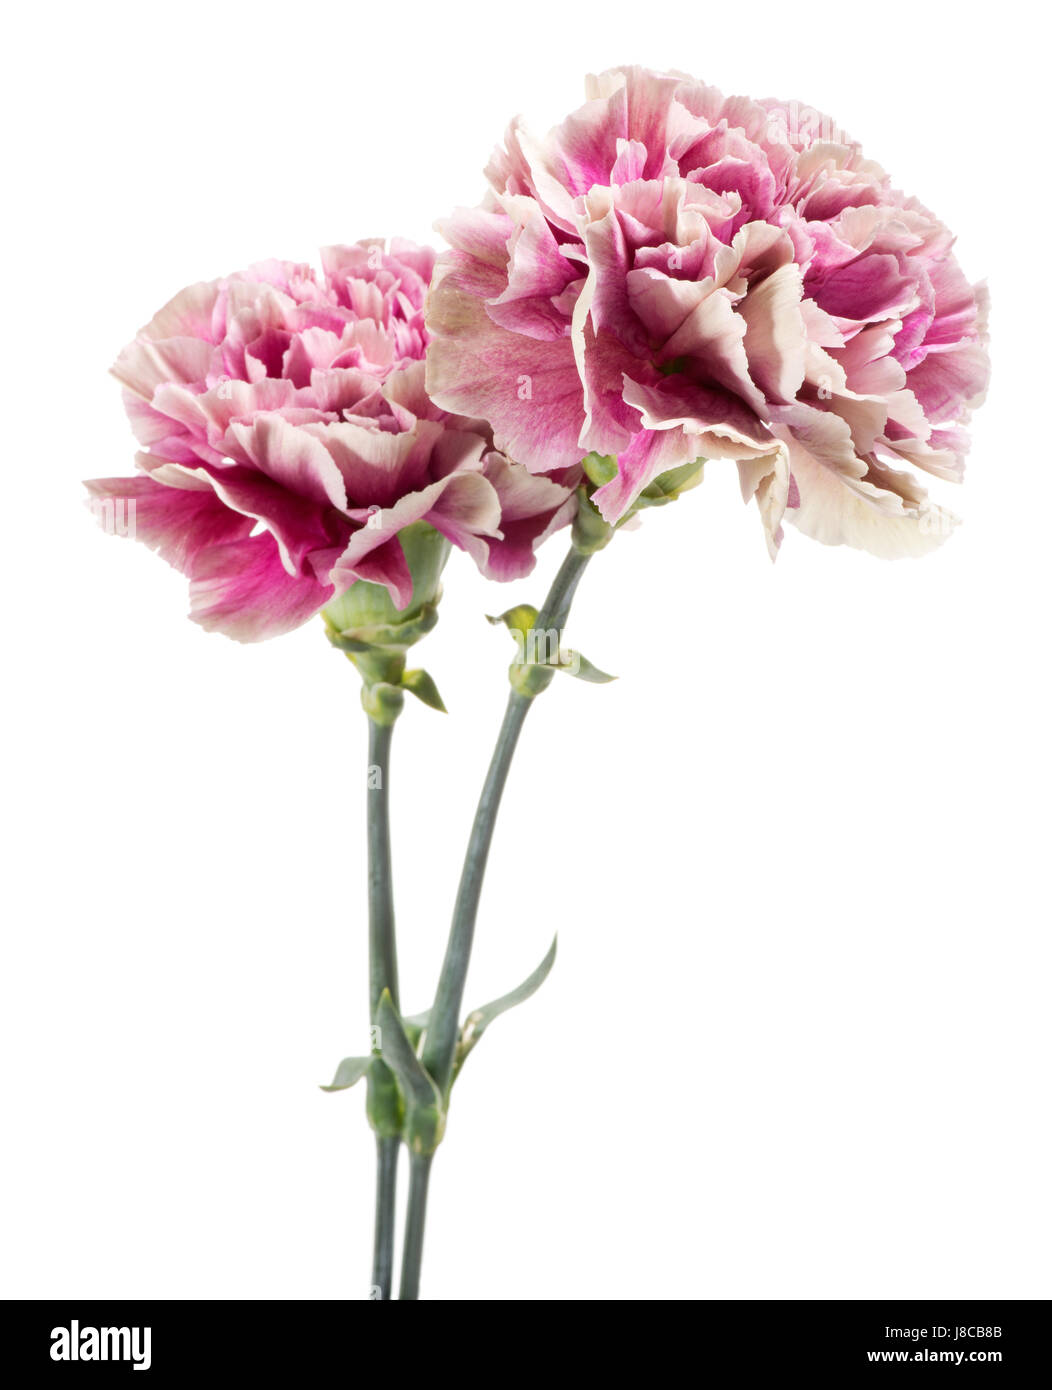 Two pink and white variegated carnations, Dianthus caryophyllus, with their fringed petals and aromatic fragrance isolated on white Stock Photo